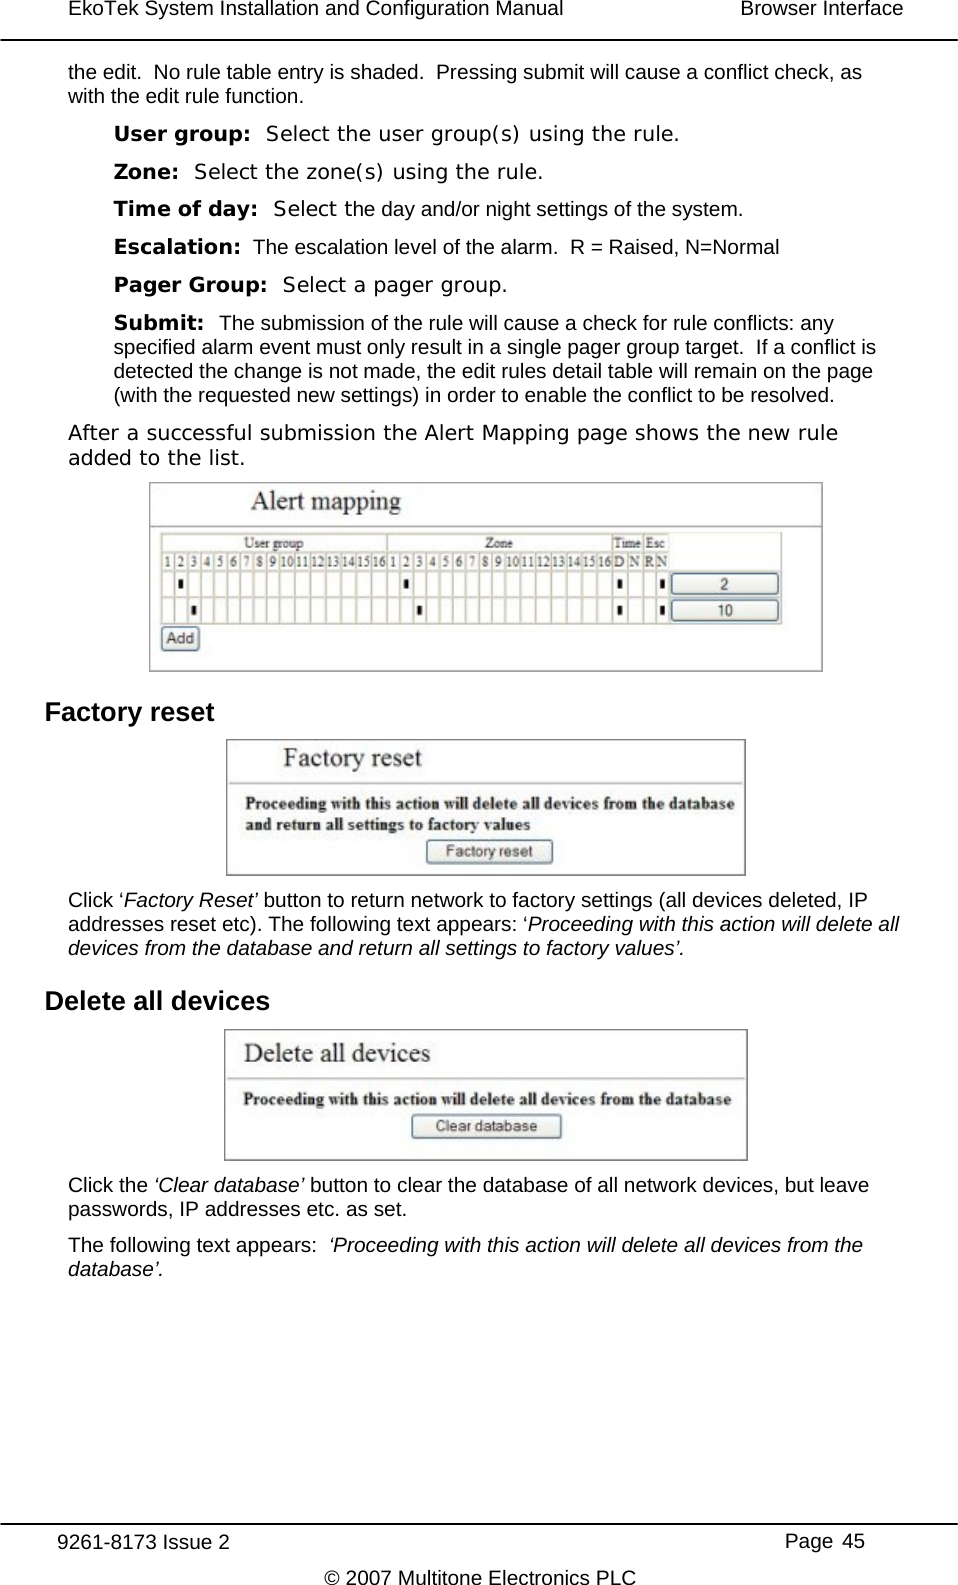 EkoTek System Installation and Configuration Manual  Browser Interface  the edit.  No rule table entry is shaded.  Pressing submit will cause a conflict check, as with the edit rule function. User group:  Select the user group(s) using the rule. Zone:  Select the zone(s) using the rule. Time of day:  Select the day and/or night settings of the system. Escalation:  The escalation level of the alarm.  R = Raised, N=Normal Pager Group:  Select a pager group. Submit:  The submission of the rule will cause a check for rule conflicts: any specified alarm event must only result in a single pager group target.  If a conflict is detected the change is not made, the edit rules detail table will remain on the page (with the requested new settings) in order to enable the conflict to be resolved. After a successful submission the Alert Mapping page shows the new rule added to the list.  Factory reset  Click ‘Factory Reset’ button to return network to factory settings (all devices deleted, IP addresses reset etc). The following text appears: ‘Proceeding with this action will delete all devices from the database and return all settings to factory values’. Delete all devices  Click the ‘Clear database’ button to clear the database of all network devices, but leave passwords, IP addresses etc. as set. The following text appears:  ‘Proceeding with this action will delete all devices from the database’. 9261-8173 Issue 2     Page 45 © 2007 Multitone Electronics PLC 